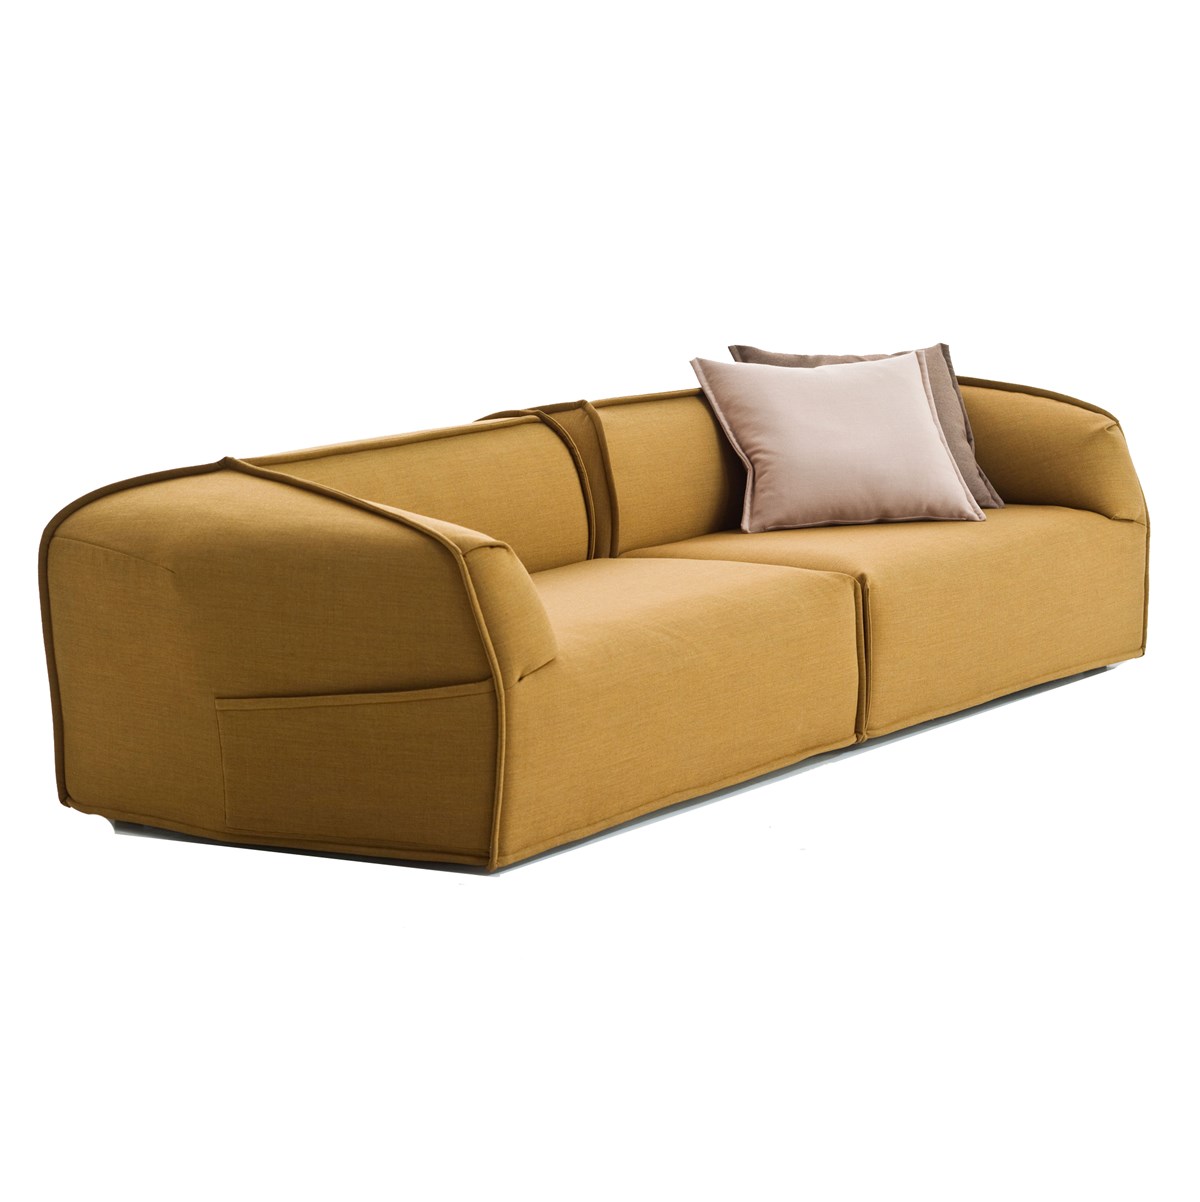 Thism.A.S.S.A.S. Sofa 3